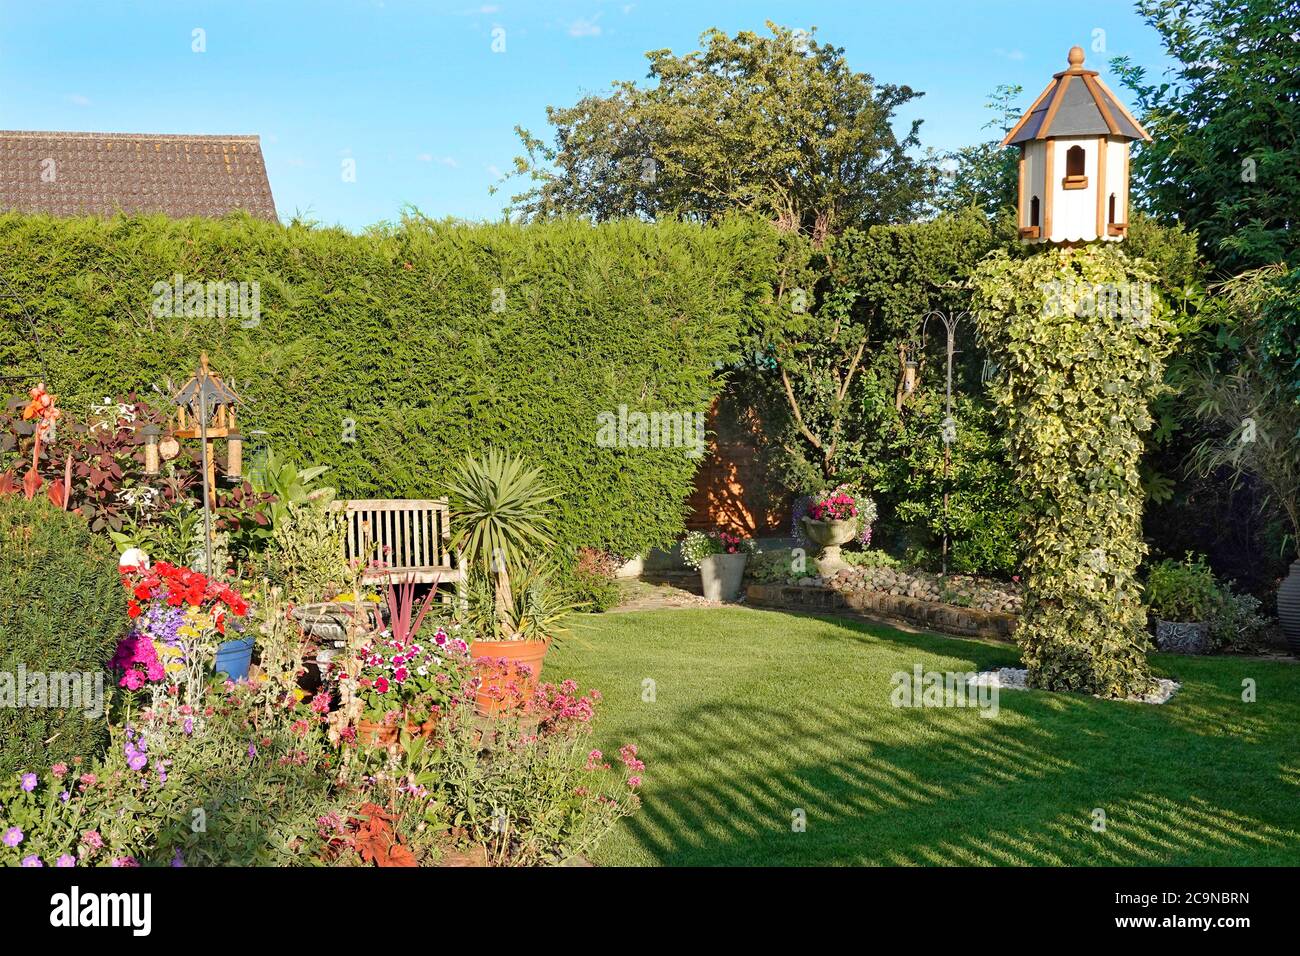 Thuja Plicata conifer hedge as backdrop to small English cottage back garden with summer perennials & lawn with seat Dovecote on  high tree stump* UK Stock Photo